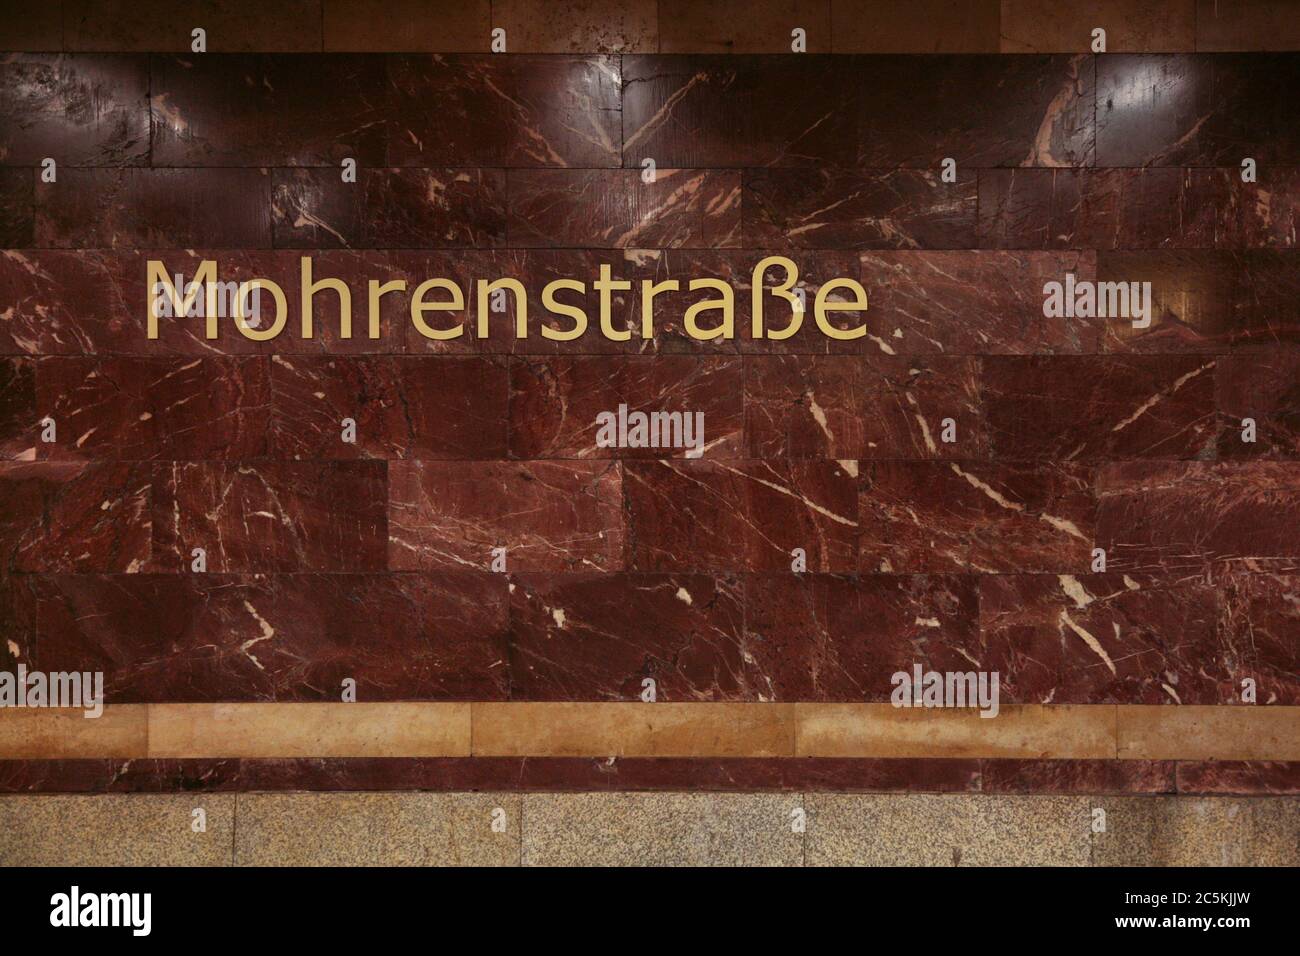 Mohrenstraße underground station in Berlin, Germany. According to the urban legend red stone used to redesign the station in the 1950s was taken from the ruins of the Reich Chancellery, which had been standing close to the station. Stock Photo